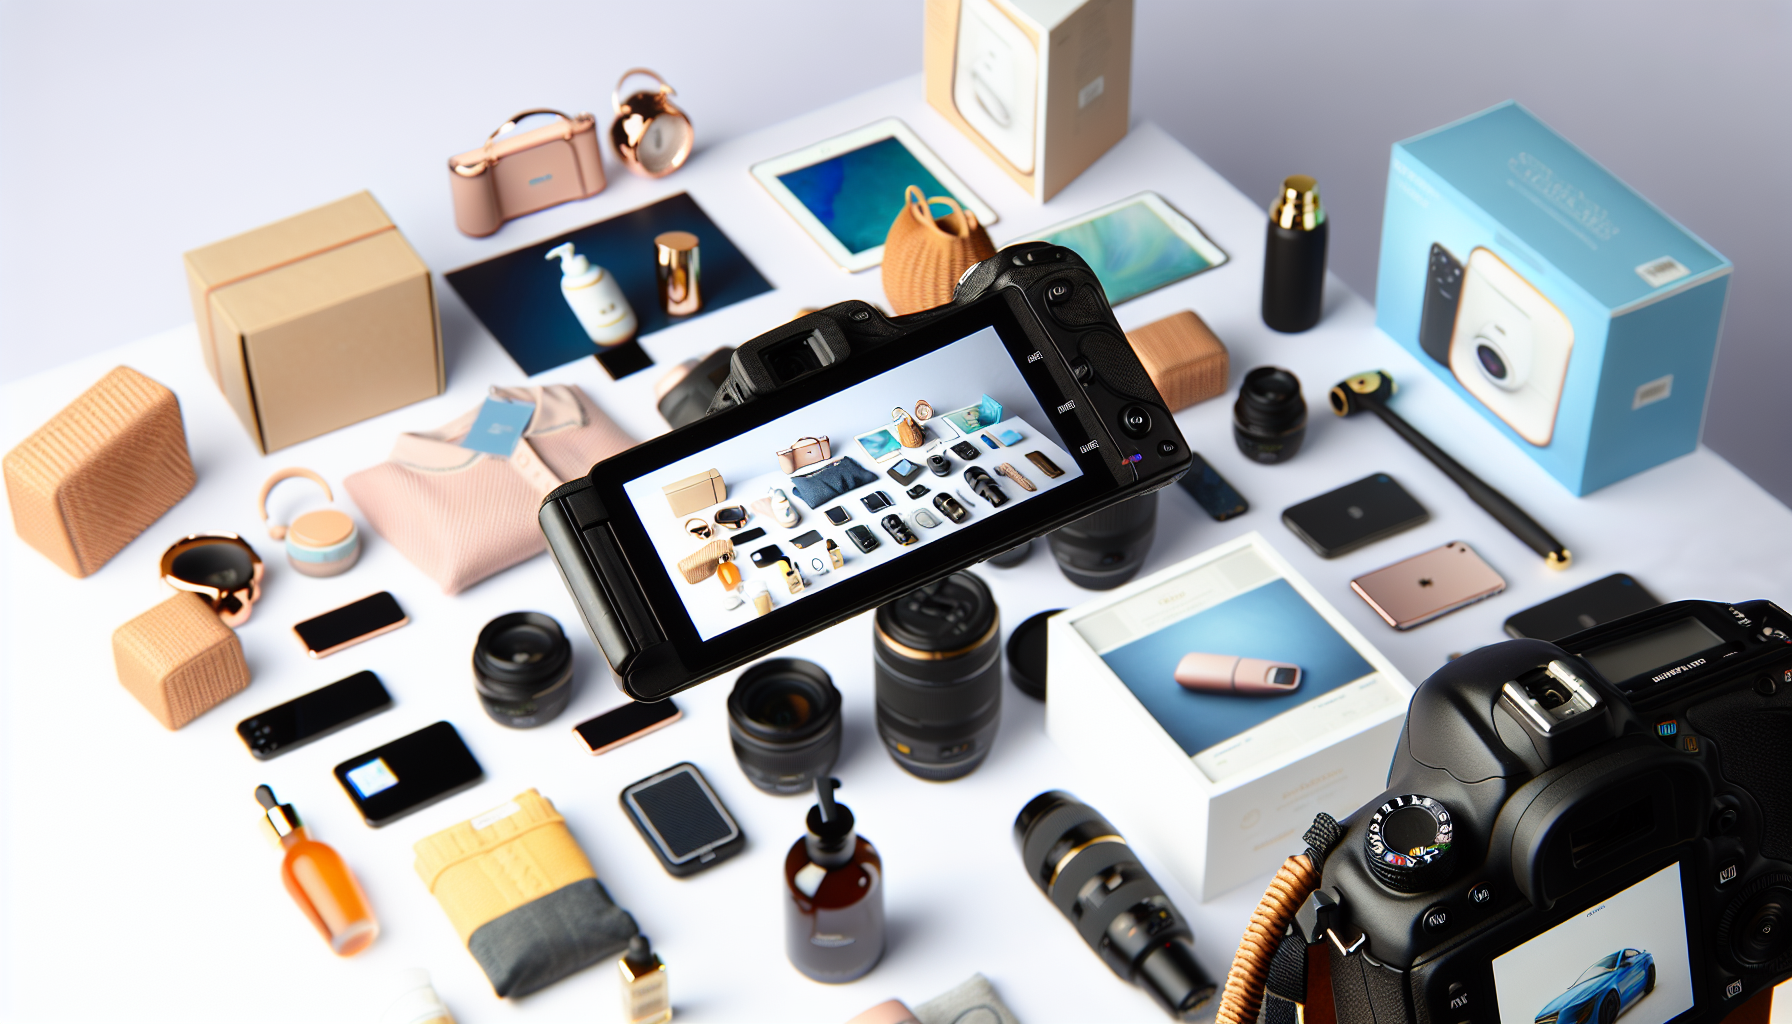 High-quality product images for ecommerce